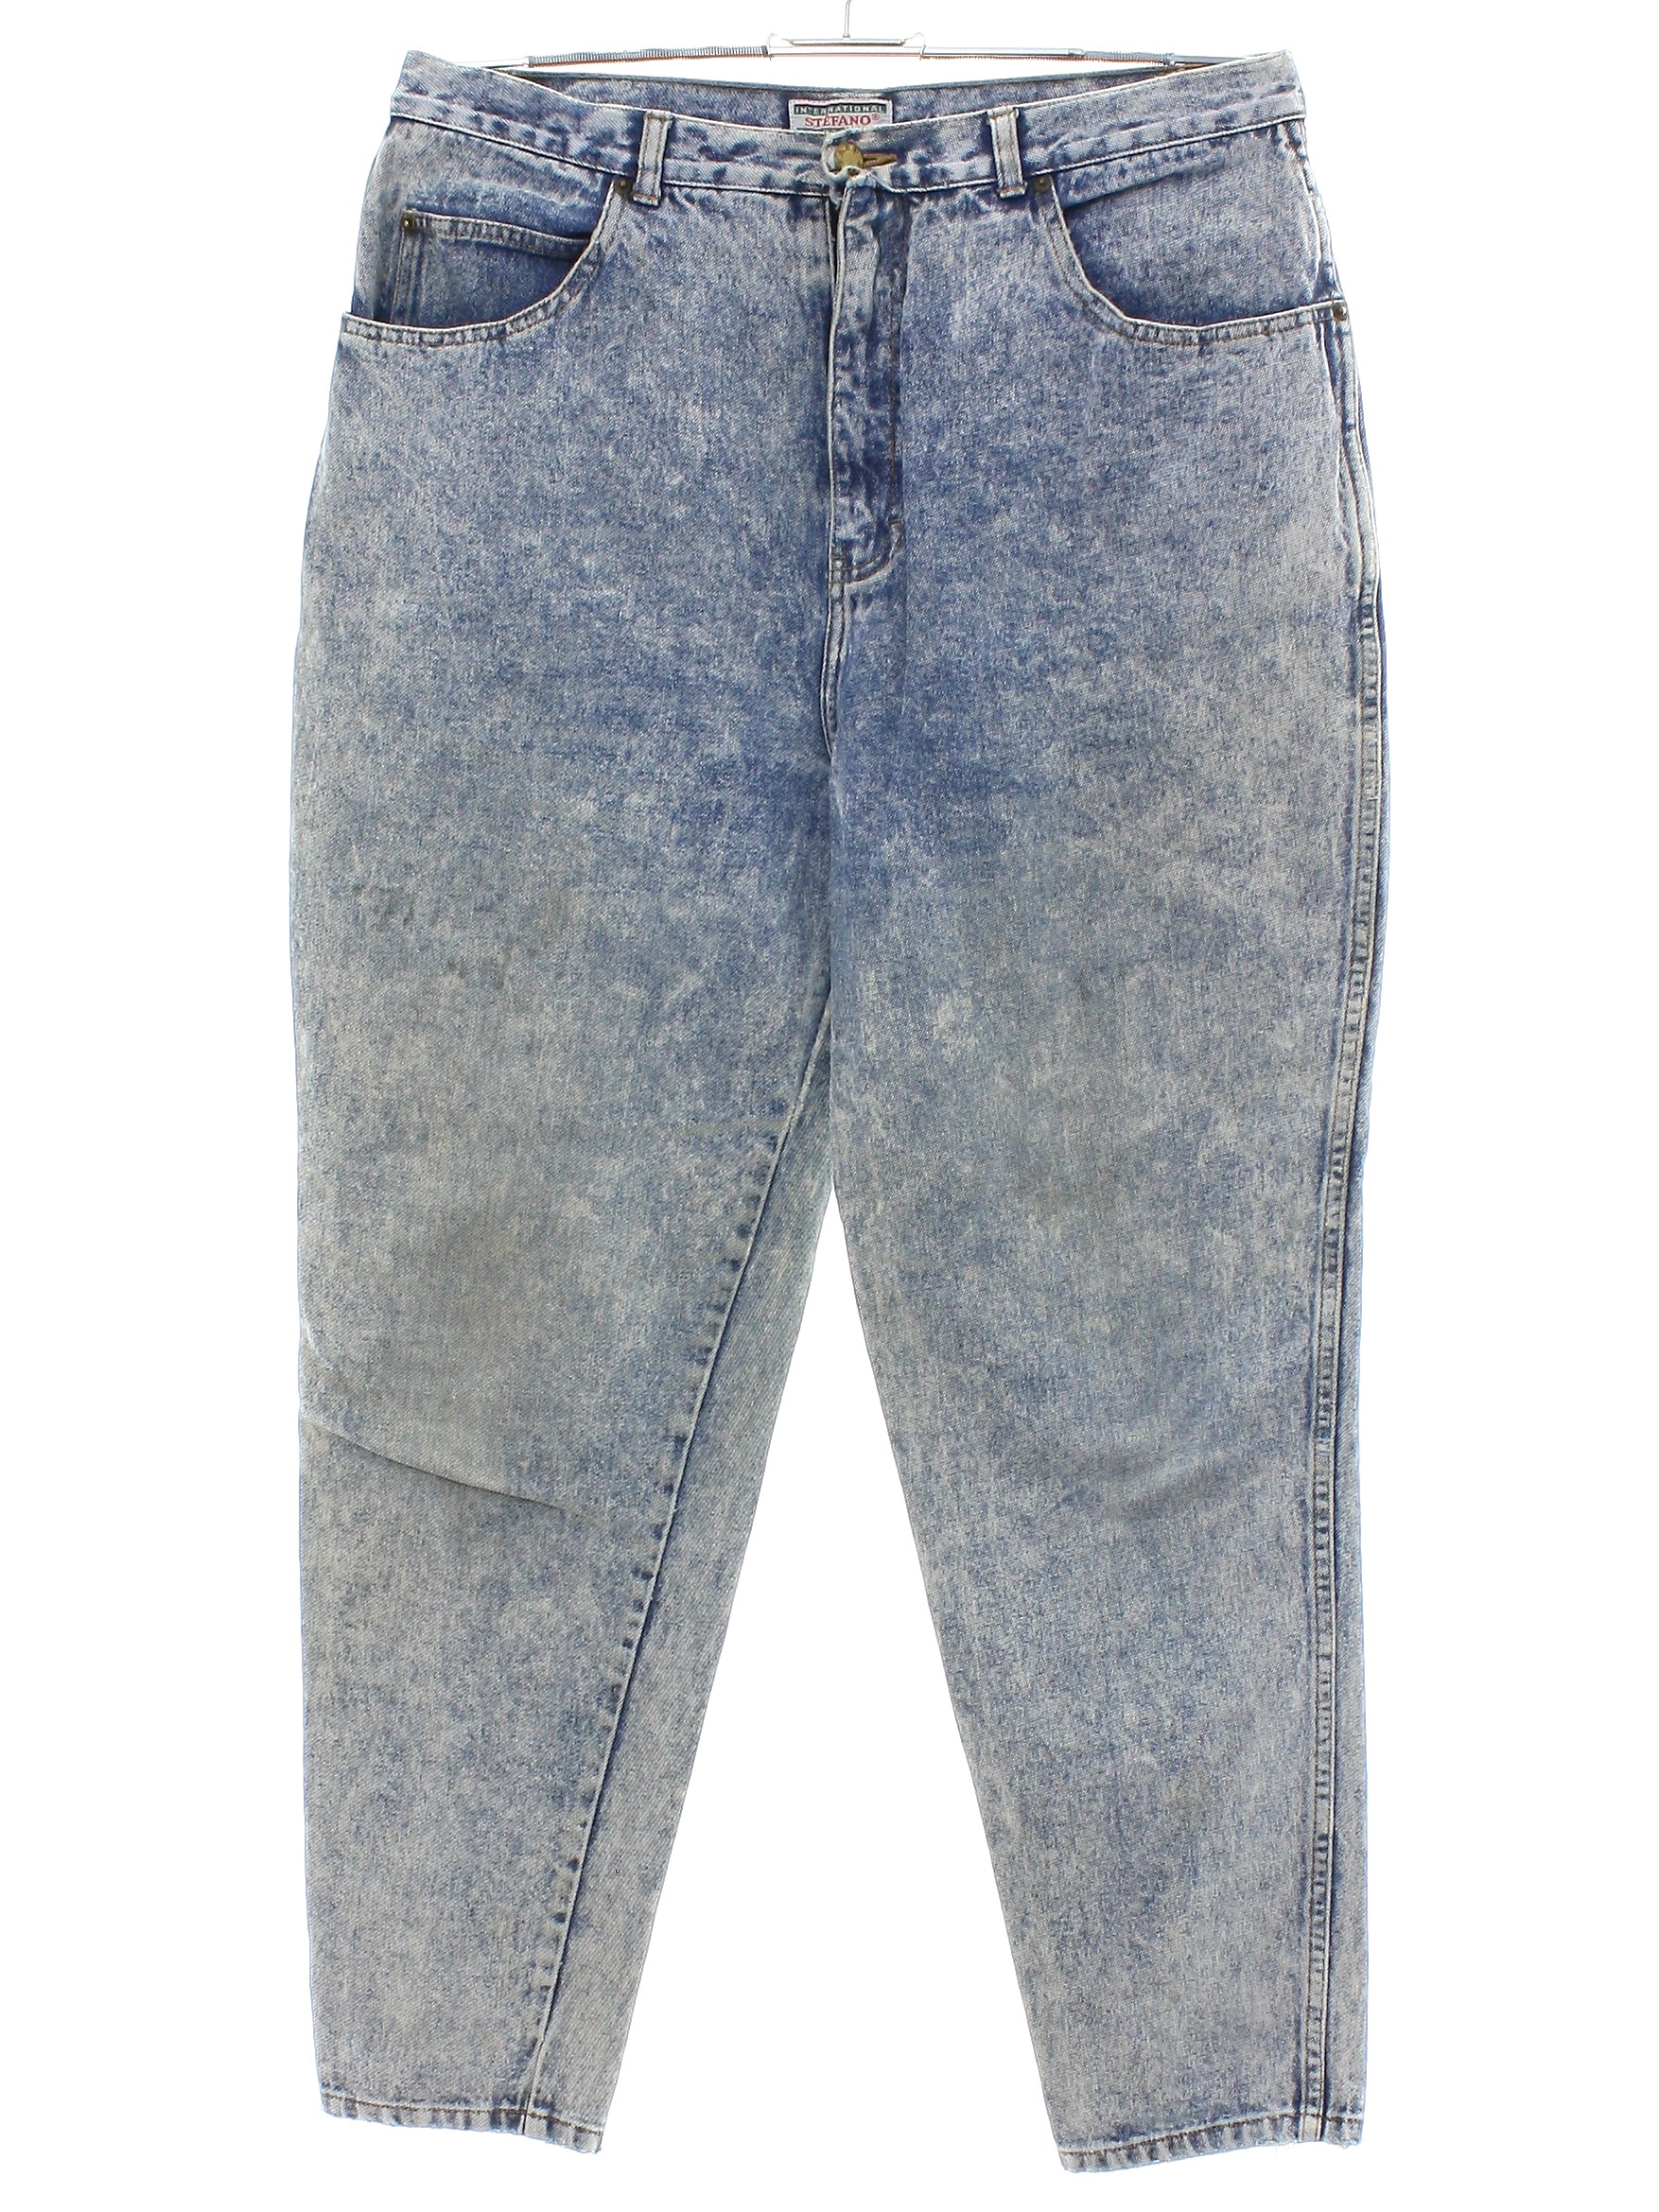 80s style jeans womens